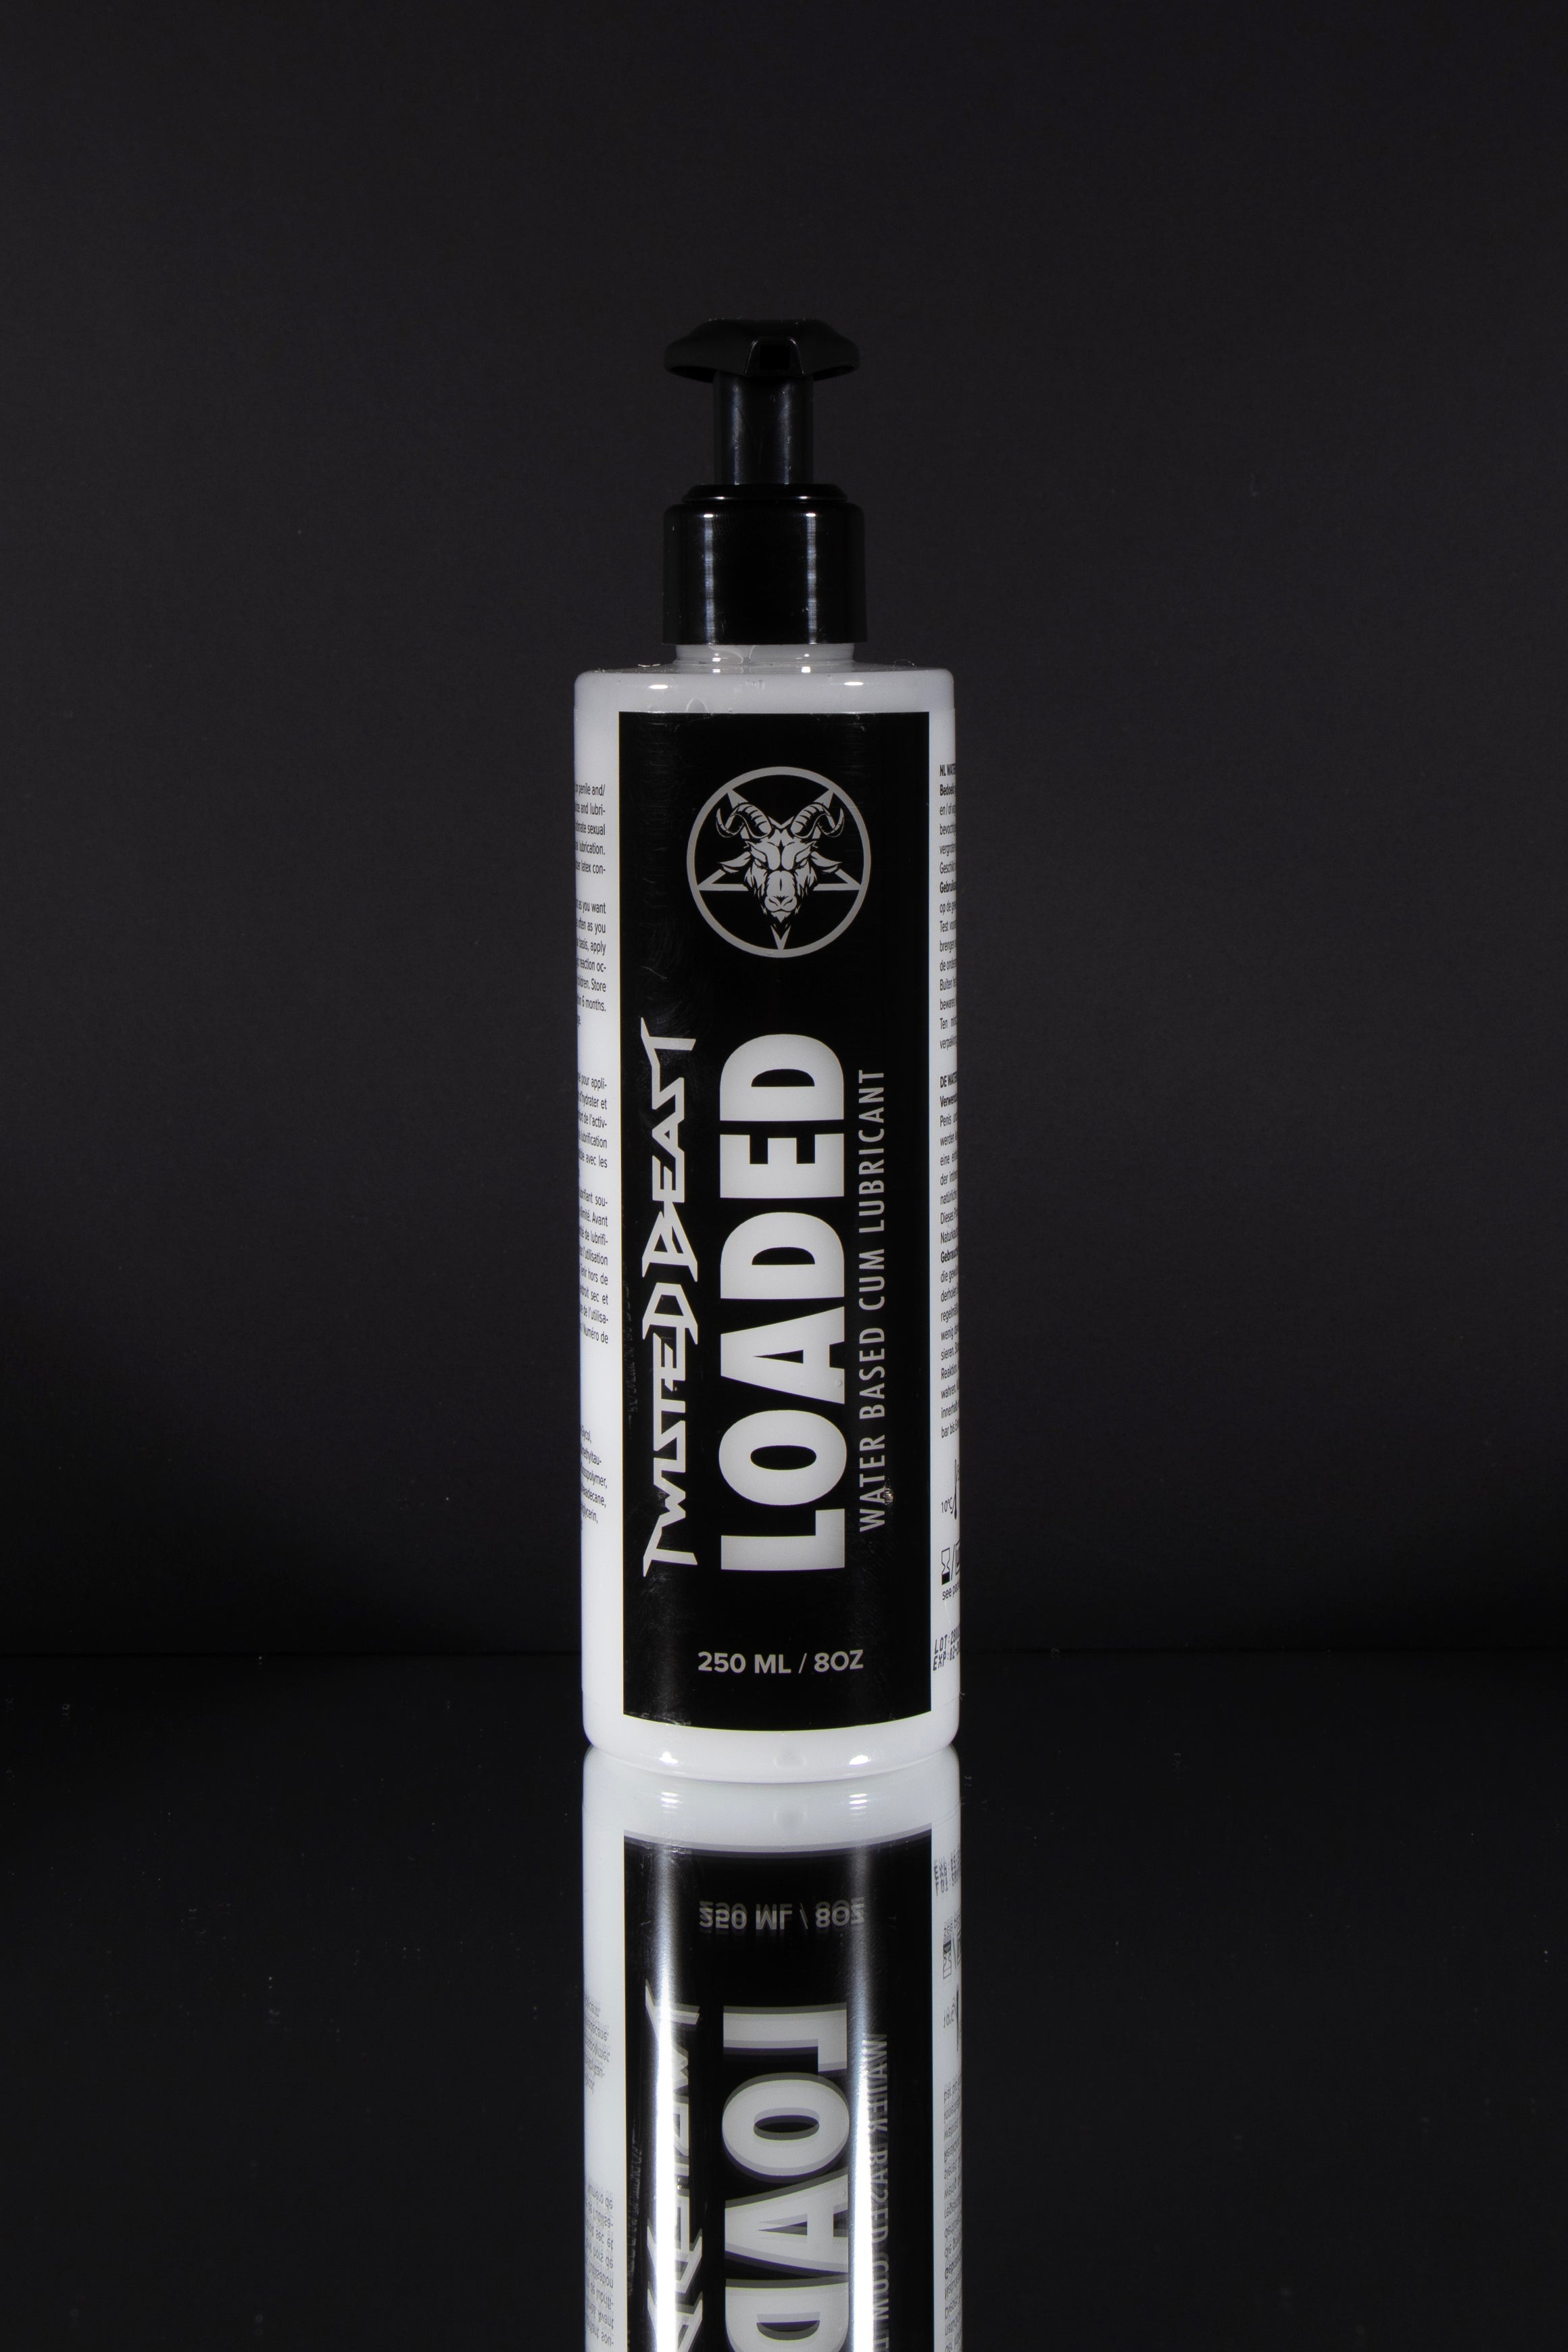 A product photo of a 250ml bottle of cum Lube.